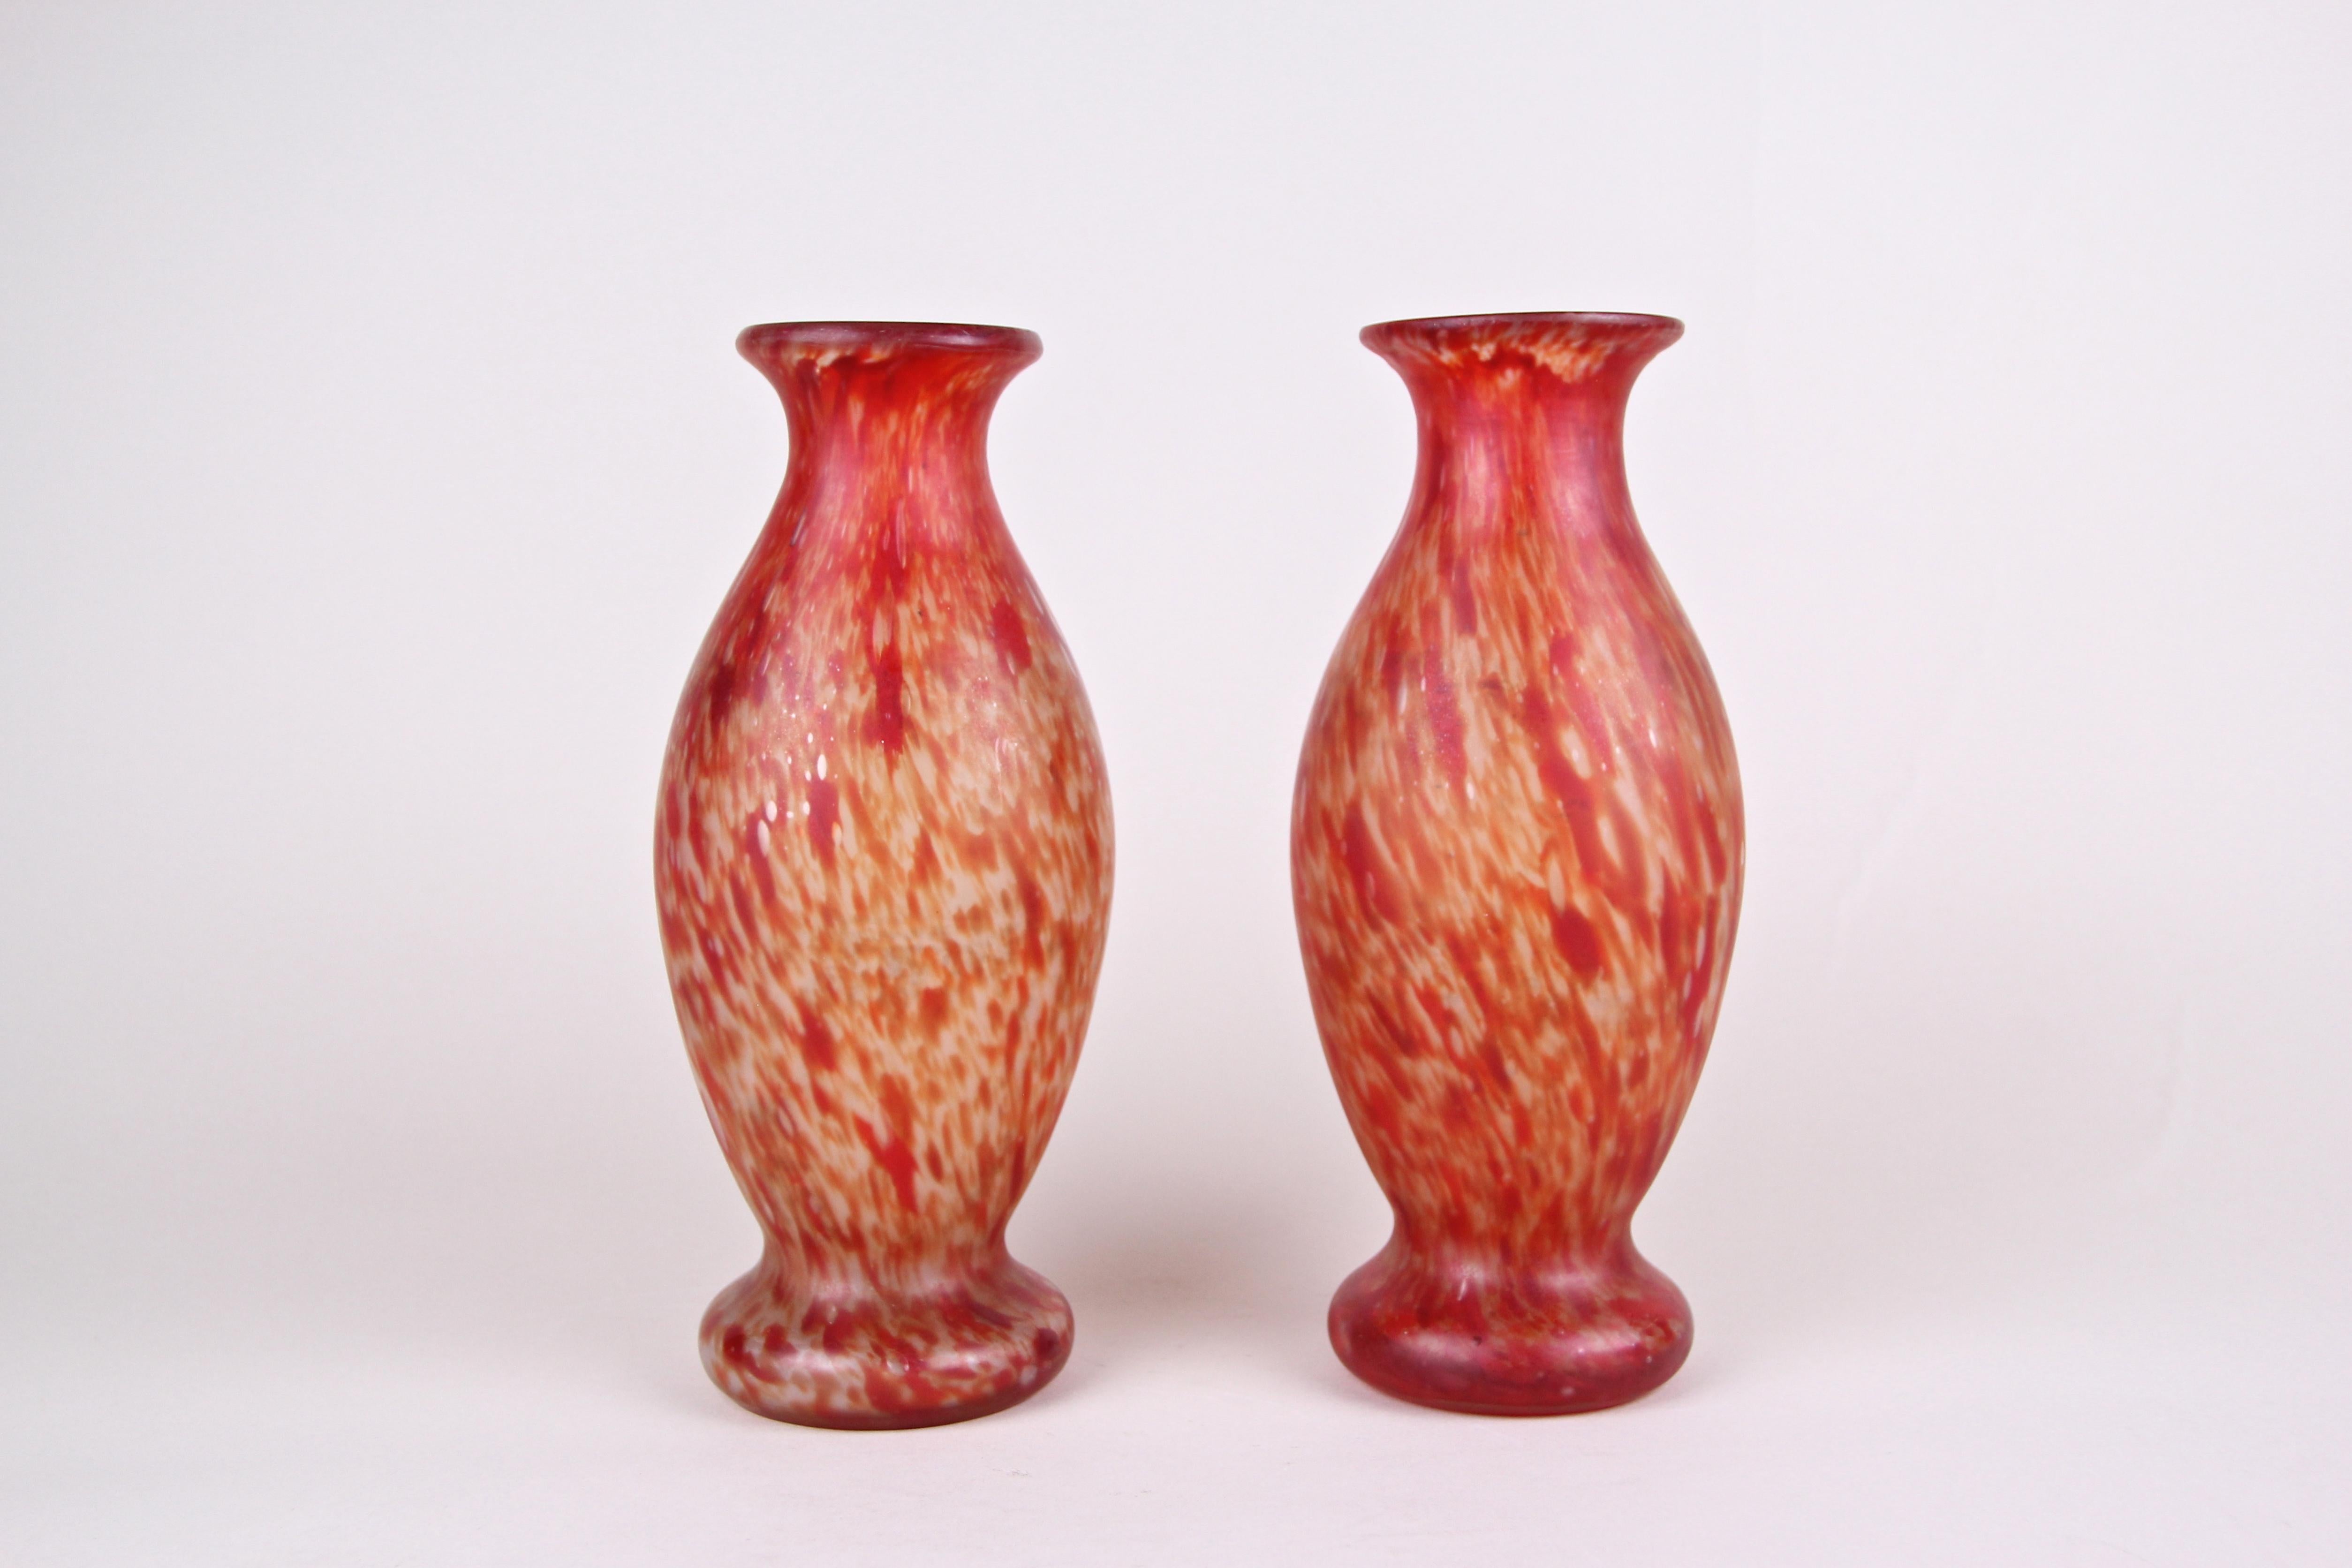 Beautiful pair of Art Nouveau glass vases from the period in France around 1900. The bulby shaped mouth blown glass vases show a unique coloration in different red and orange tones. Both vases come in very good original condition. A nice pair of